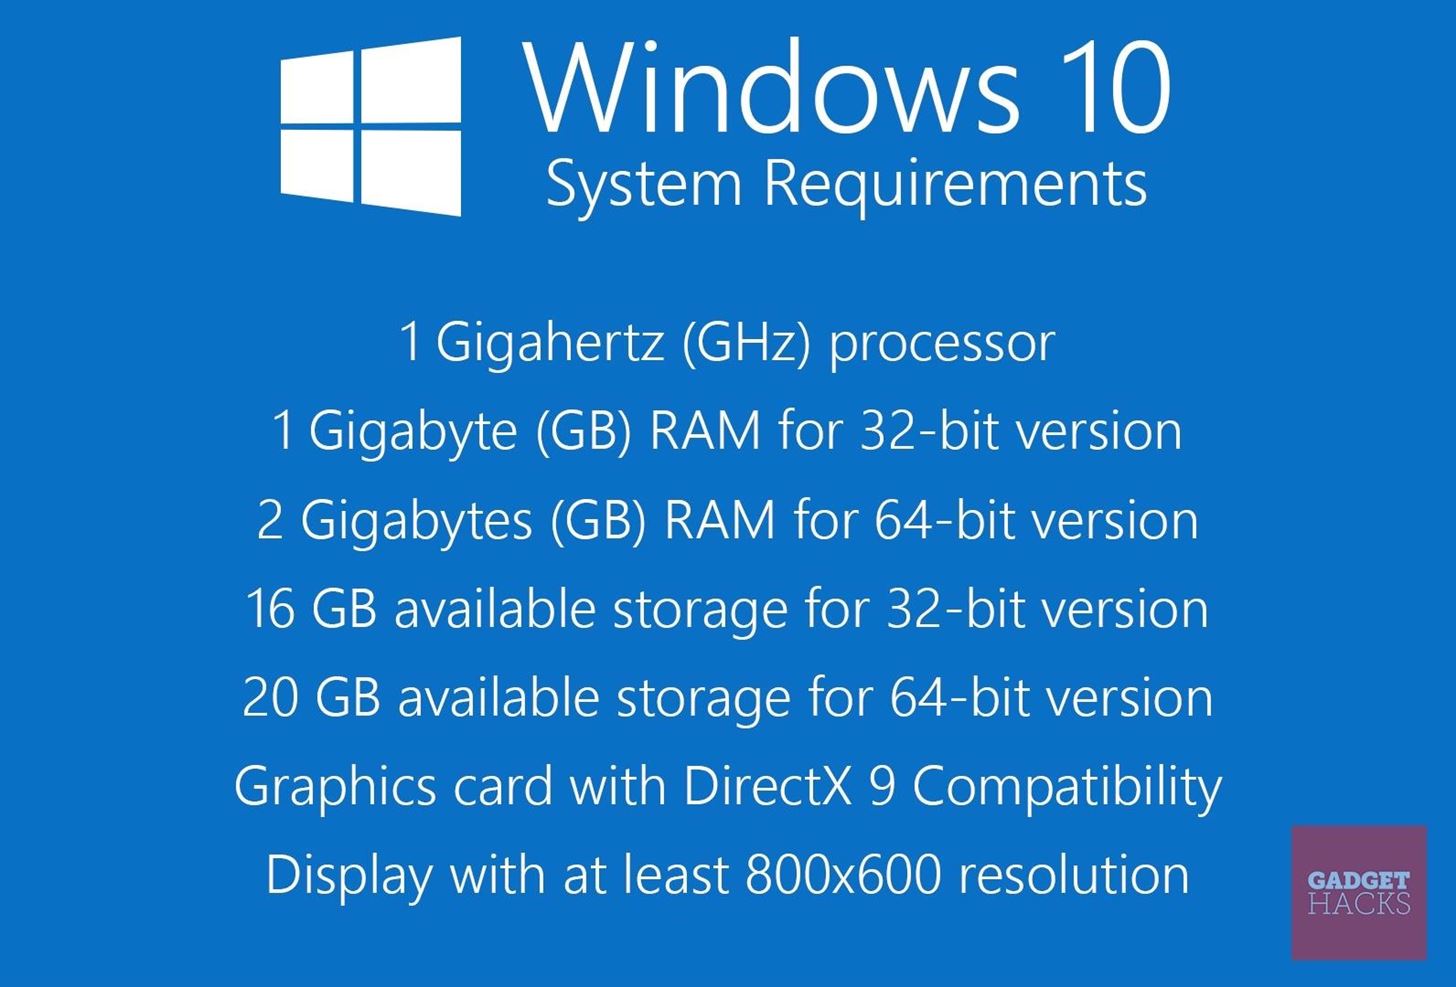 How to Get Your Computer Ready for the Windows 10 Update